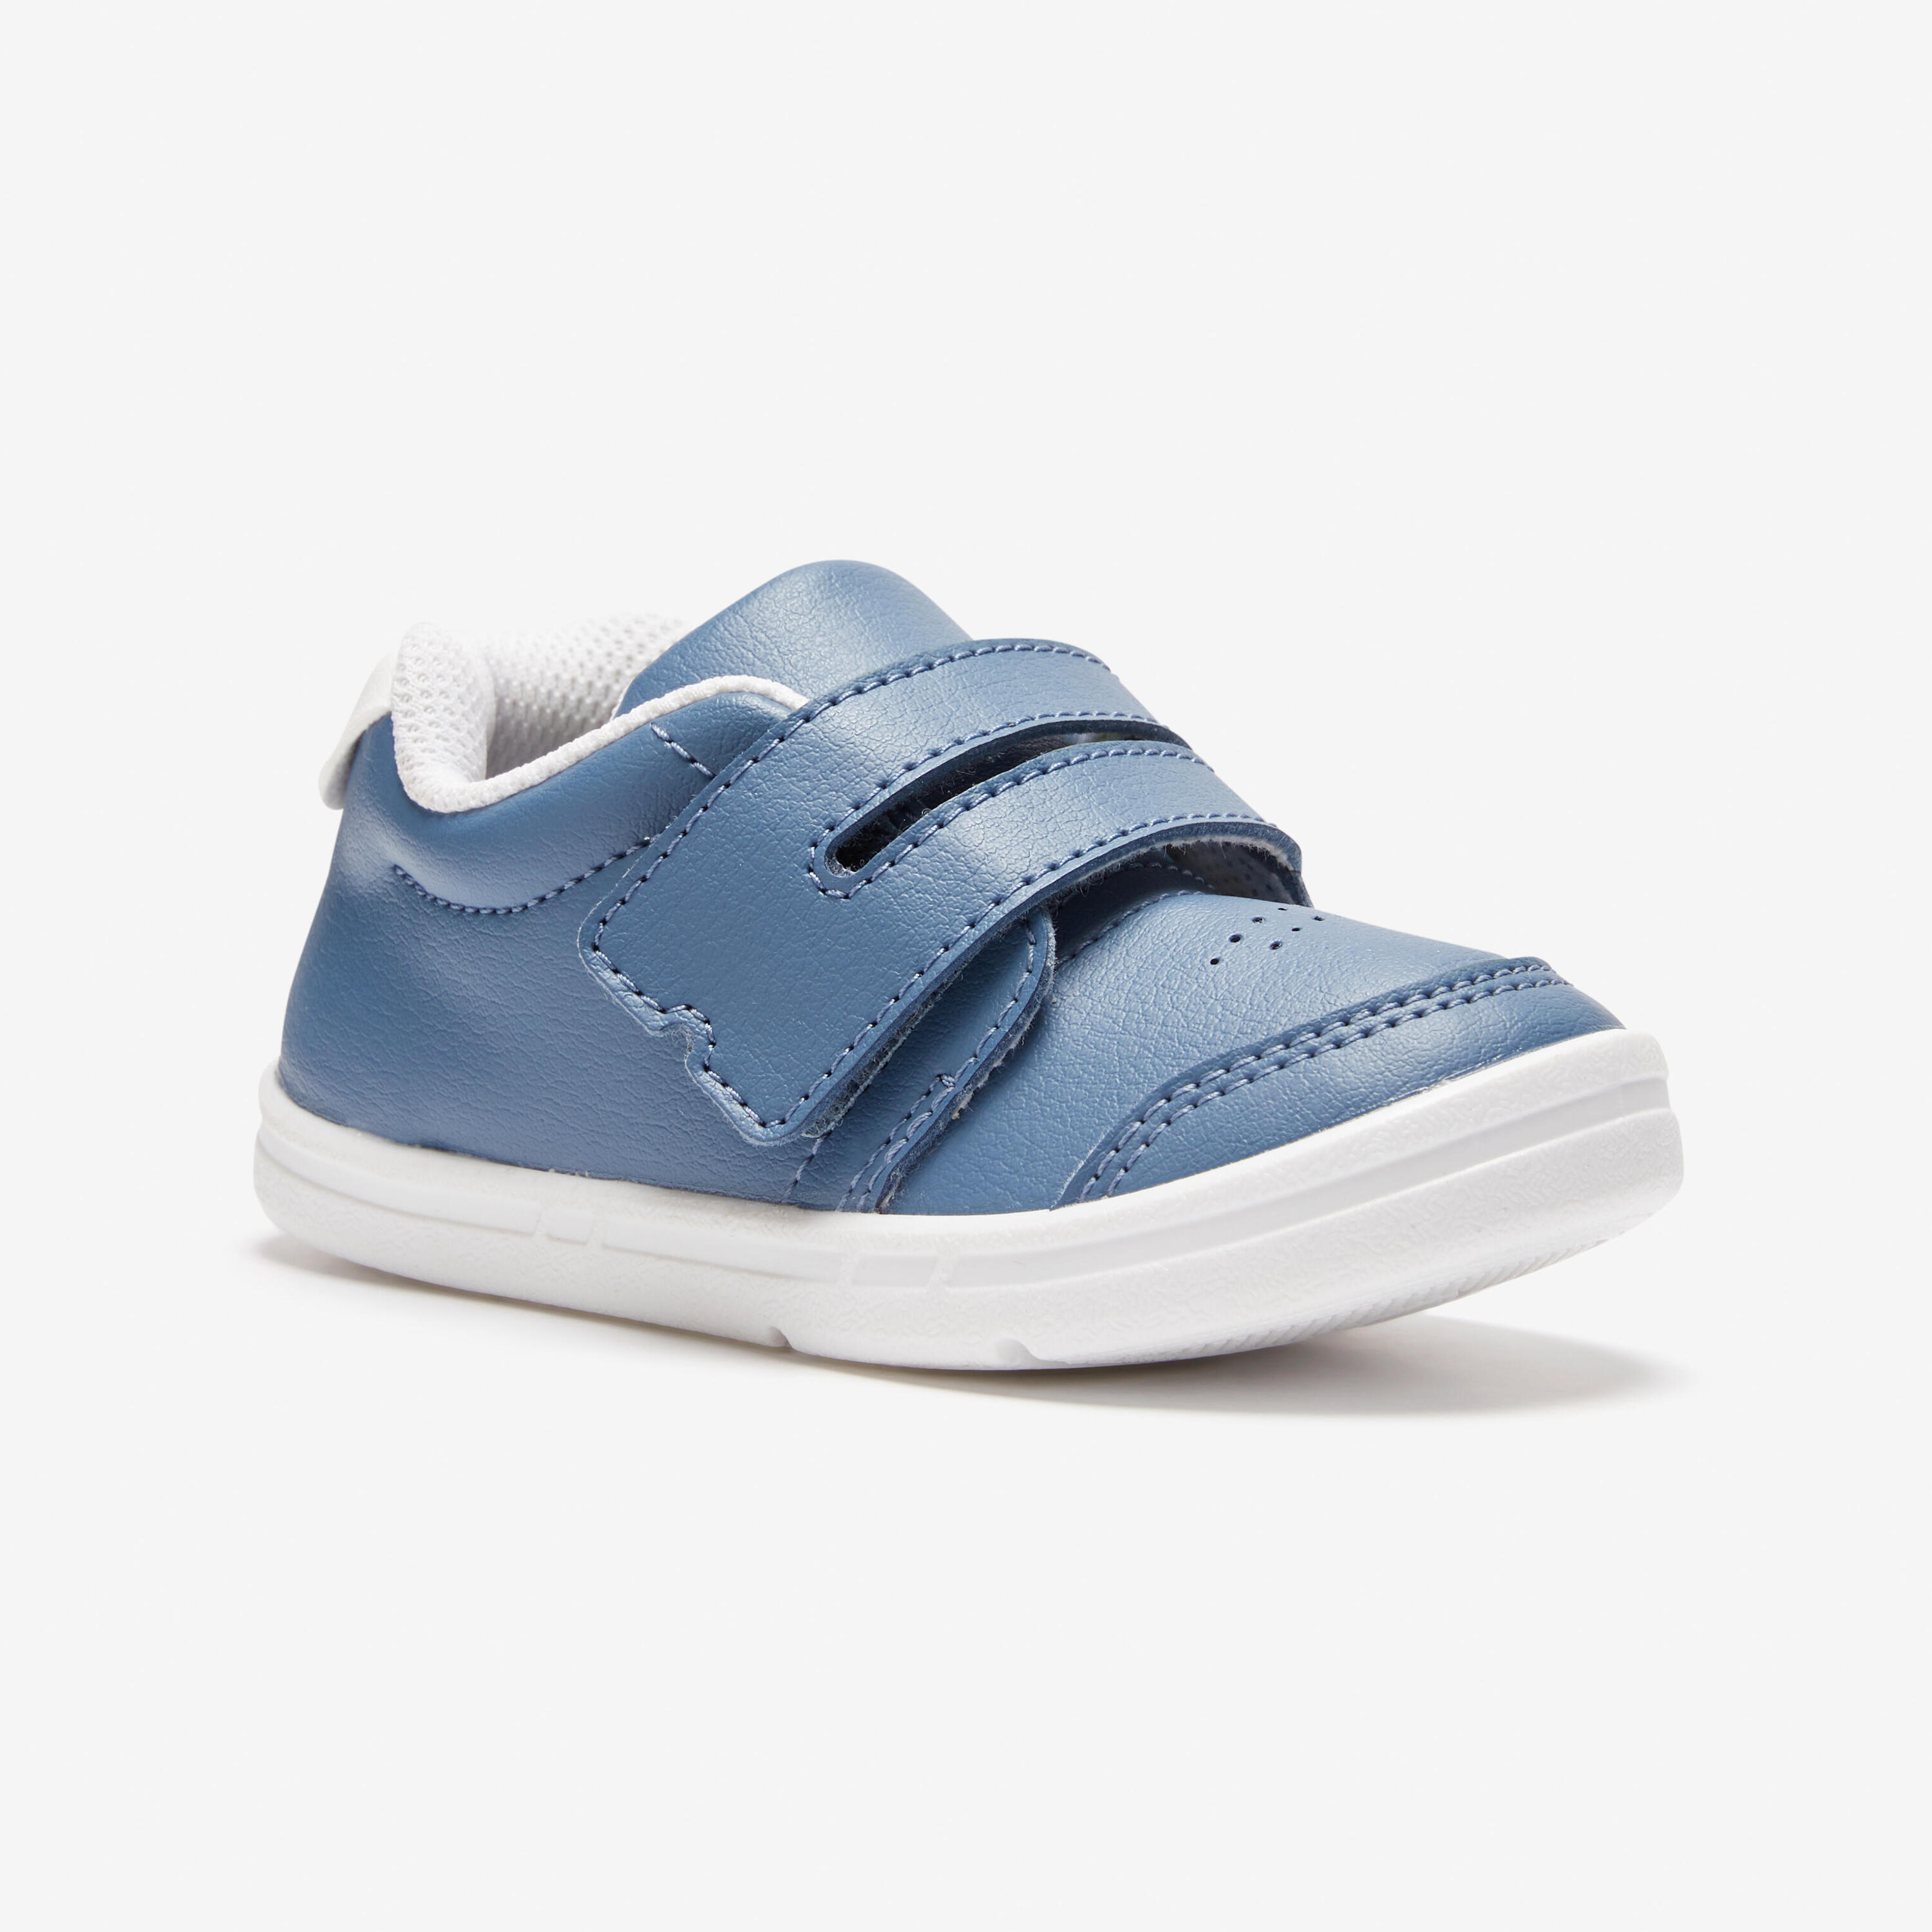 DOMYOS Kids' Rip-Tab First Step Shoes Size 3.5C to 6.5C I Learn